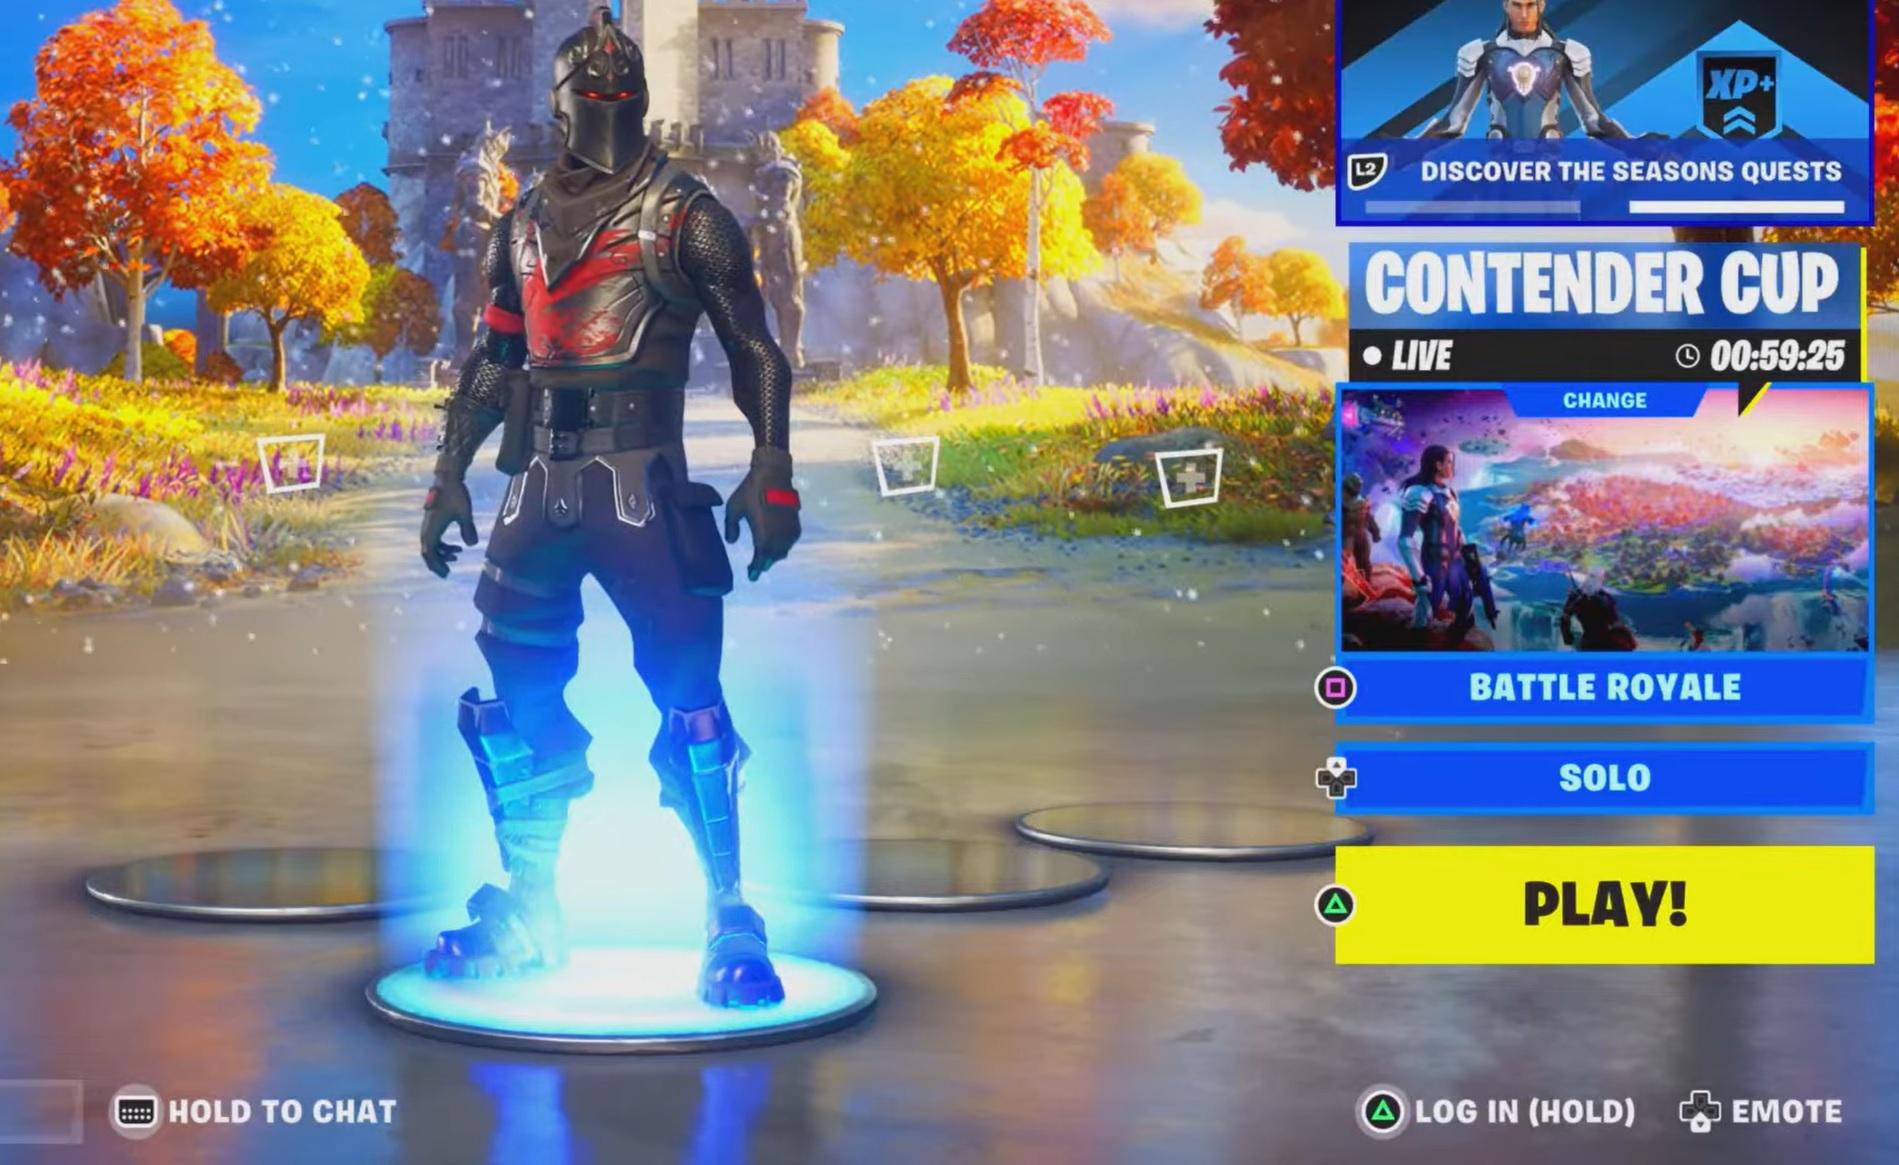 Fortnite: How to Play Split-Screen on Xbox One and PlayStation 4